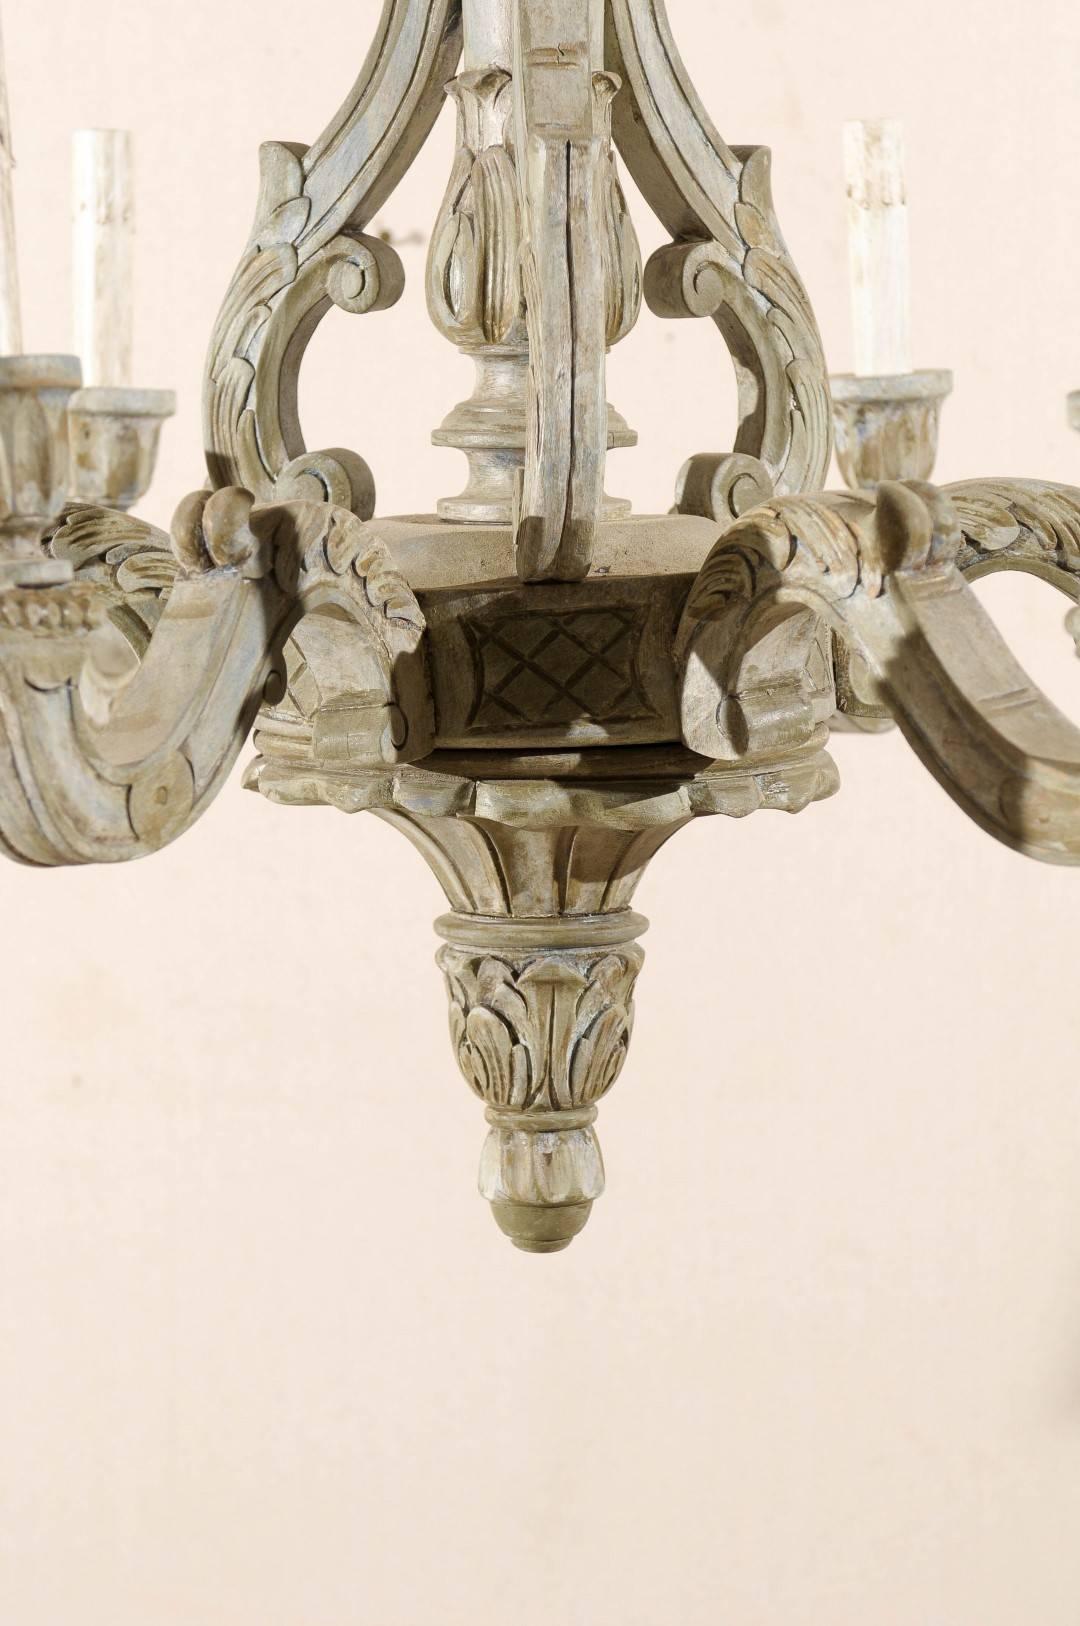 French Vintage Six-Light Wood Chandelier with Ornate Carvings and Scroll Arms 3